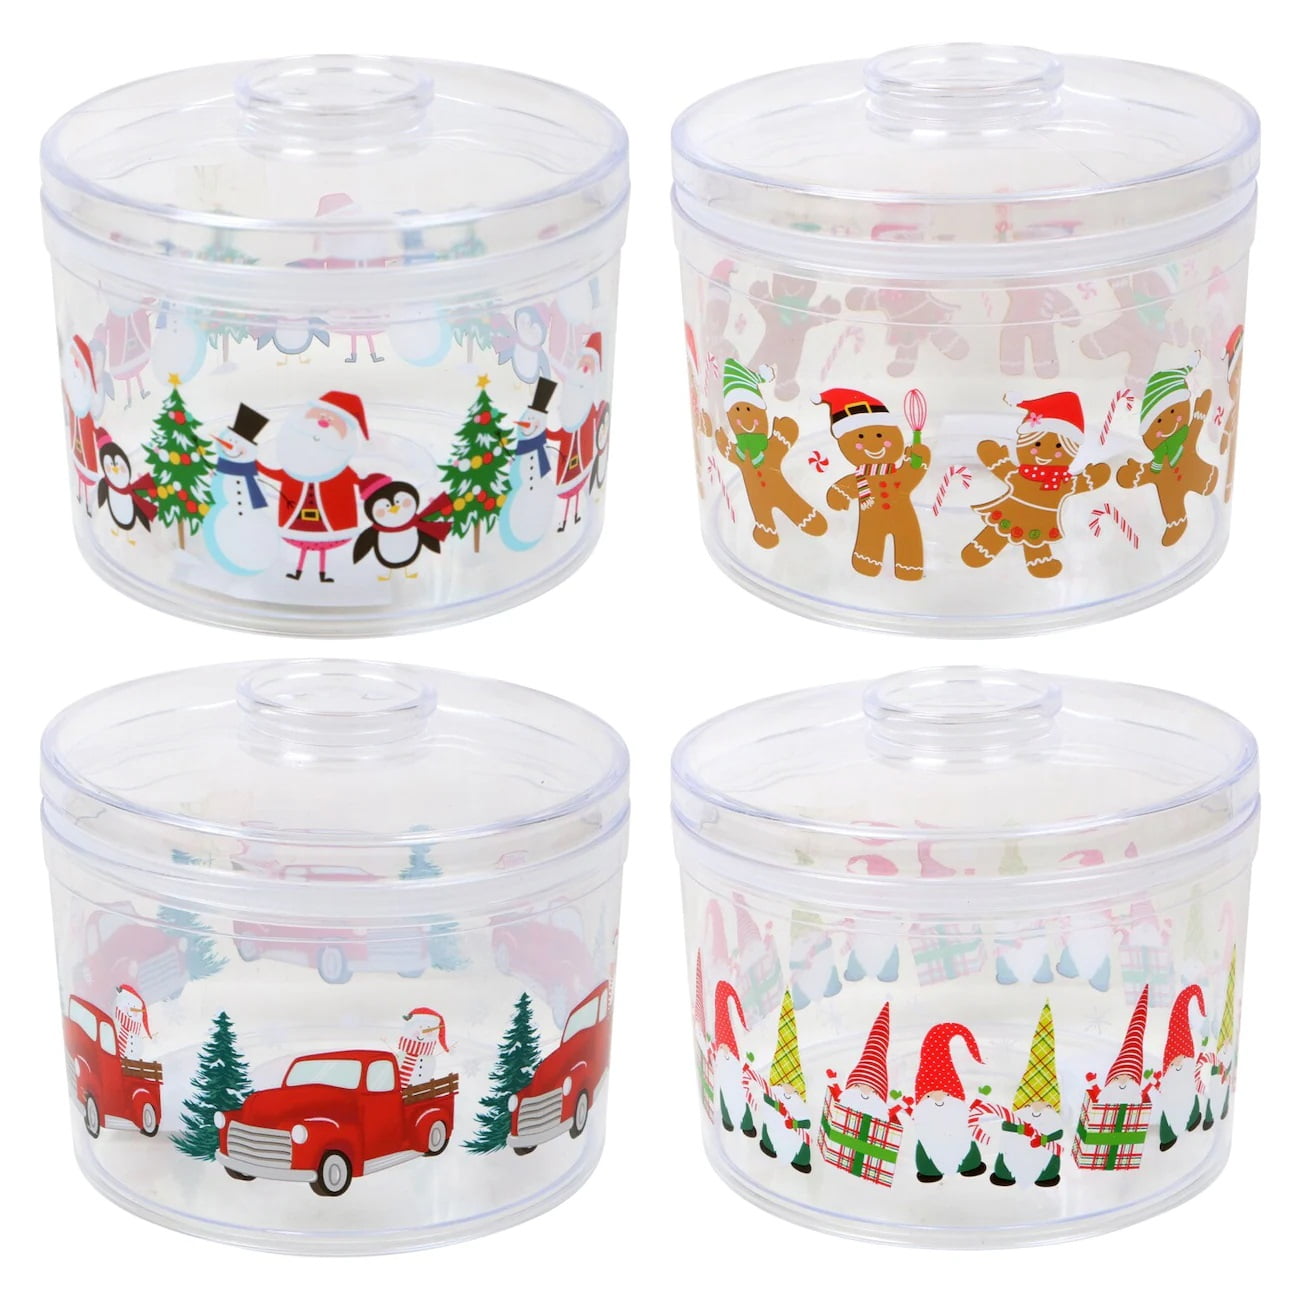 Didiseaon 5pcs Christmas Candy Jar Candy Container Ball Shaped Candy Jar  Coffee Containers Plastic Container with Lid Christmas Treats Bottle Candy